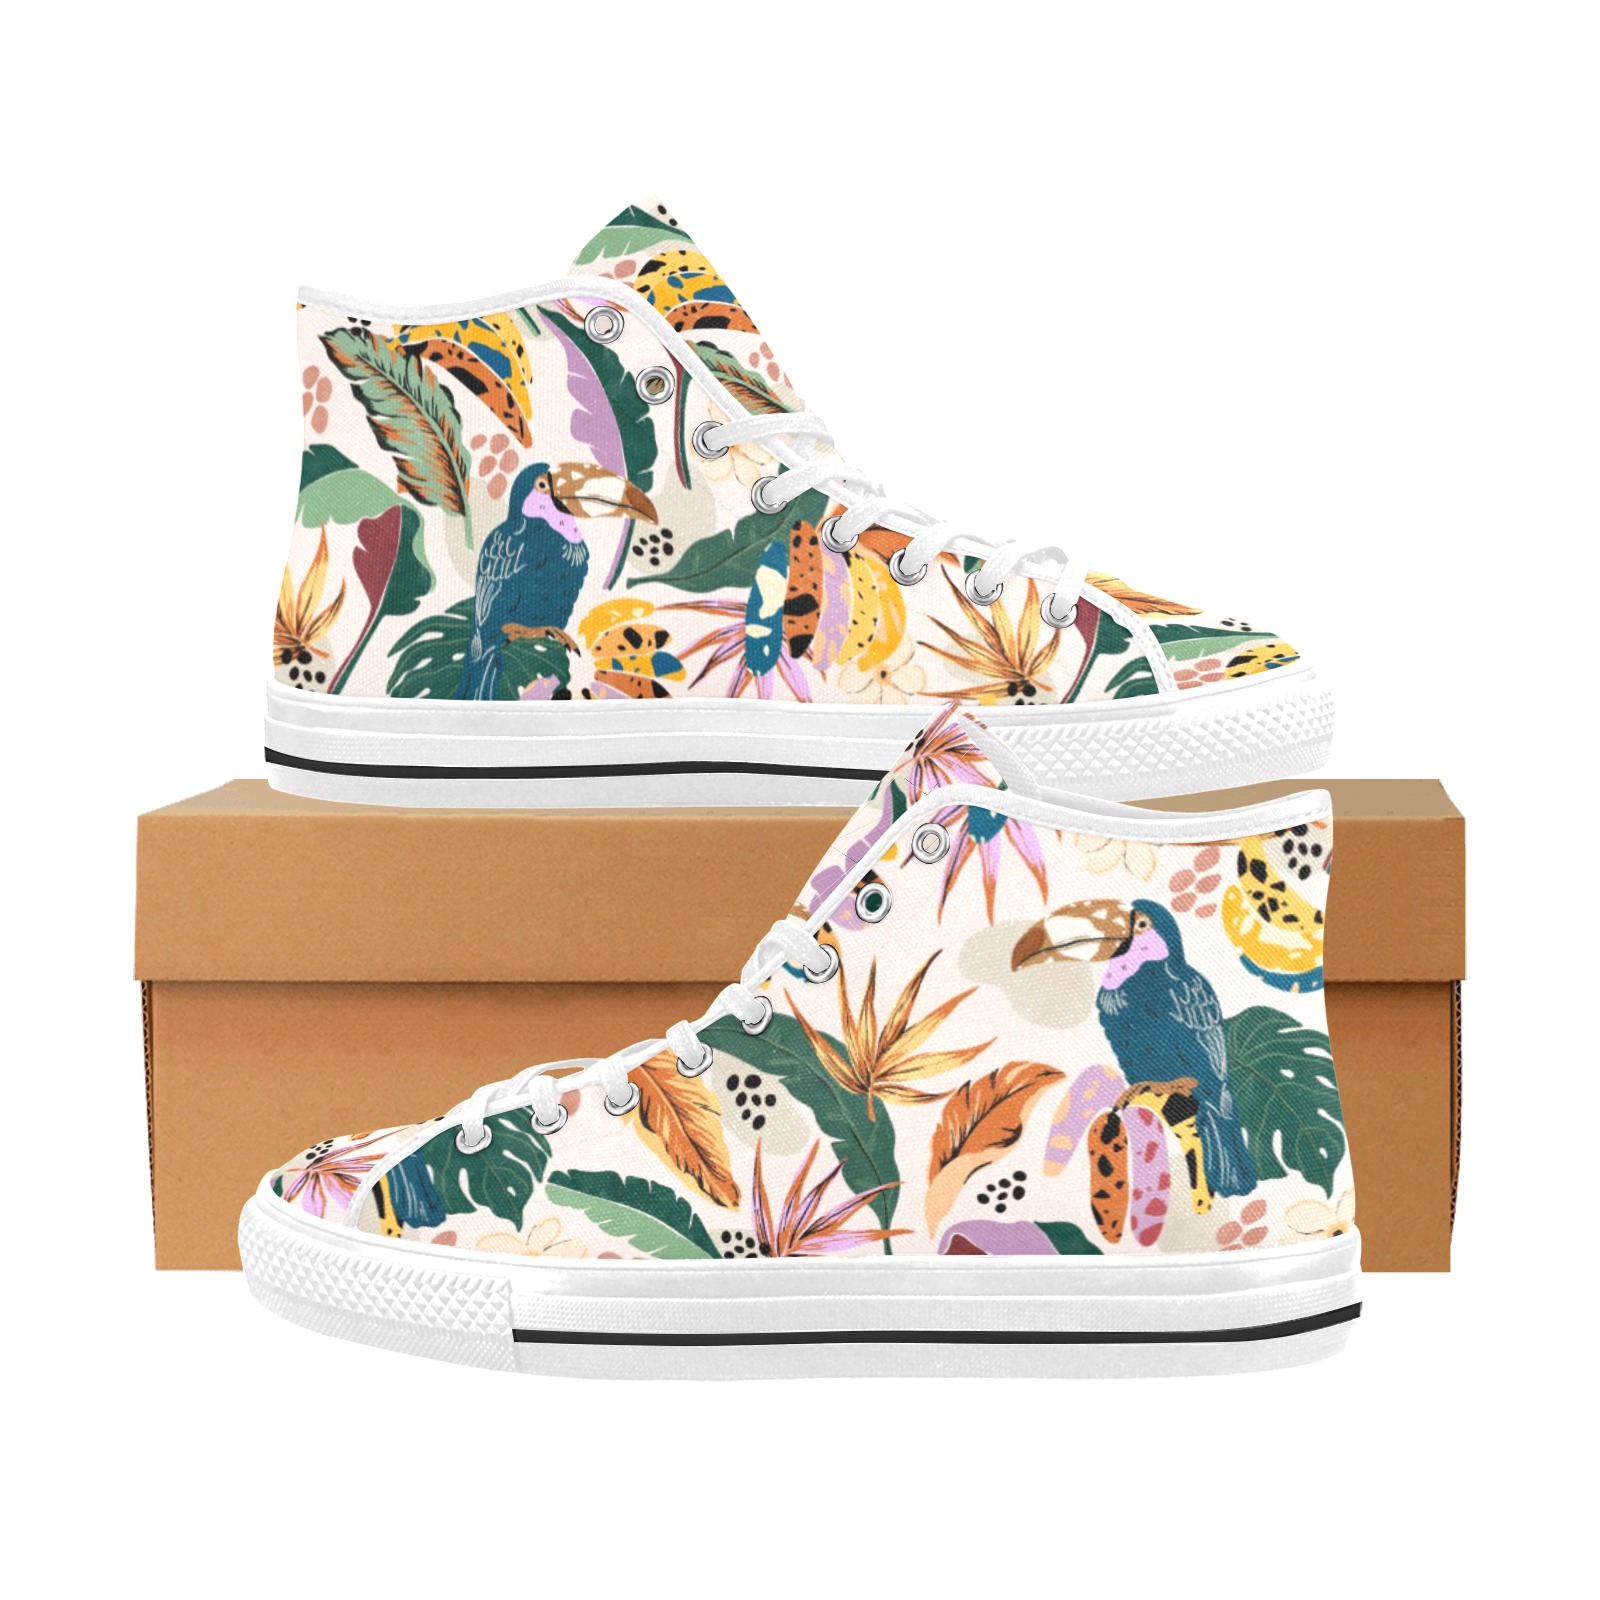 Toucans in wild tropical nature Vancouver H Women's Canvas Shoes (1013-1)